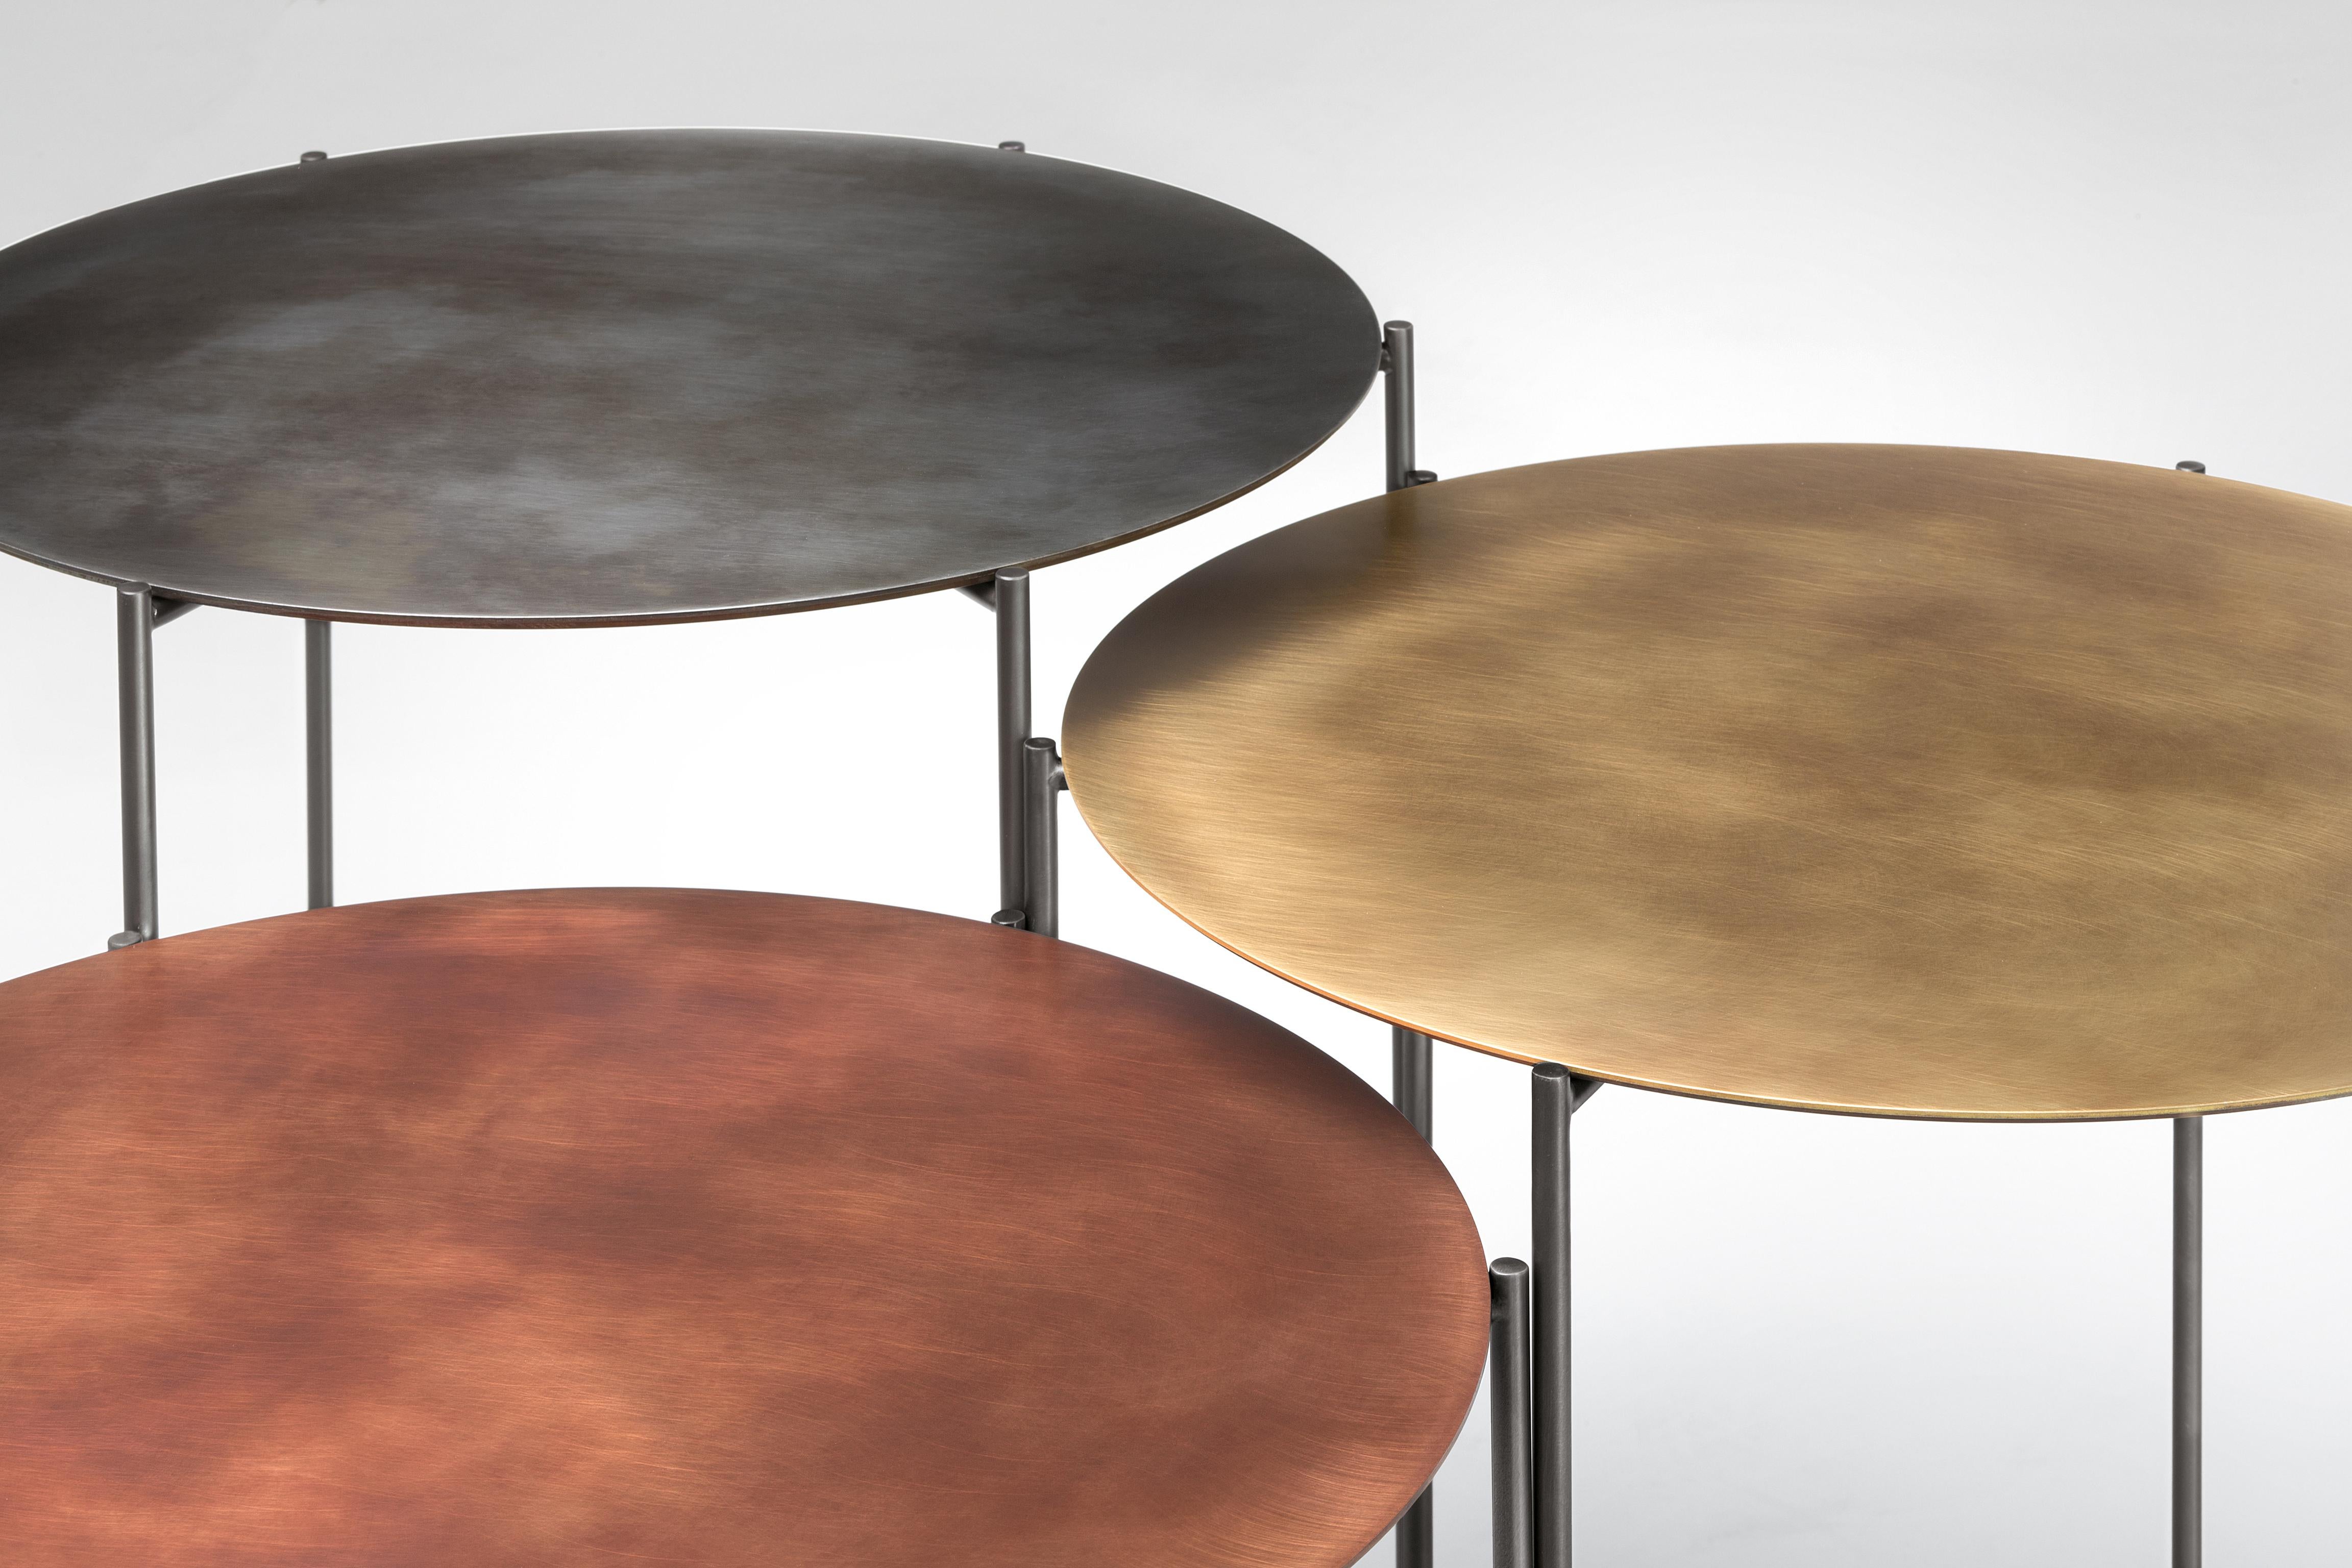 The Band coffee table set creates ‘micro architecture’ whose most distinctive trait is lightness. Long, slender legs support thin circular table tops, where metal nuances vibrate. In iron, brass and copper, these multifaceted objects gracefully and